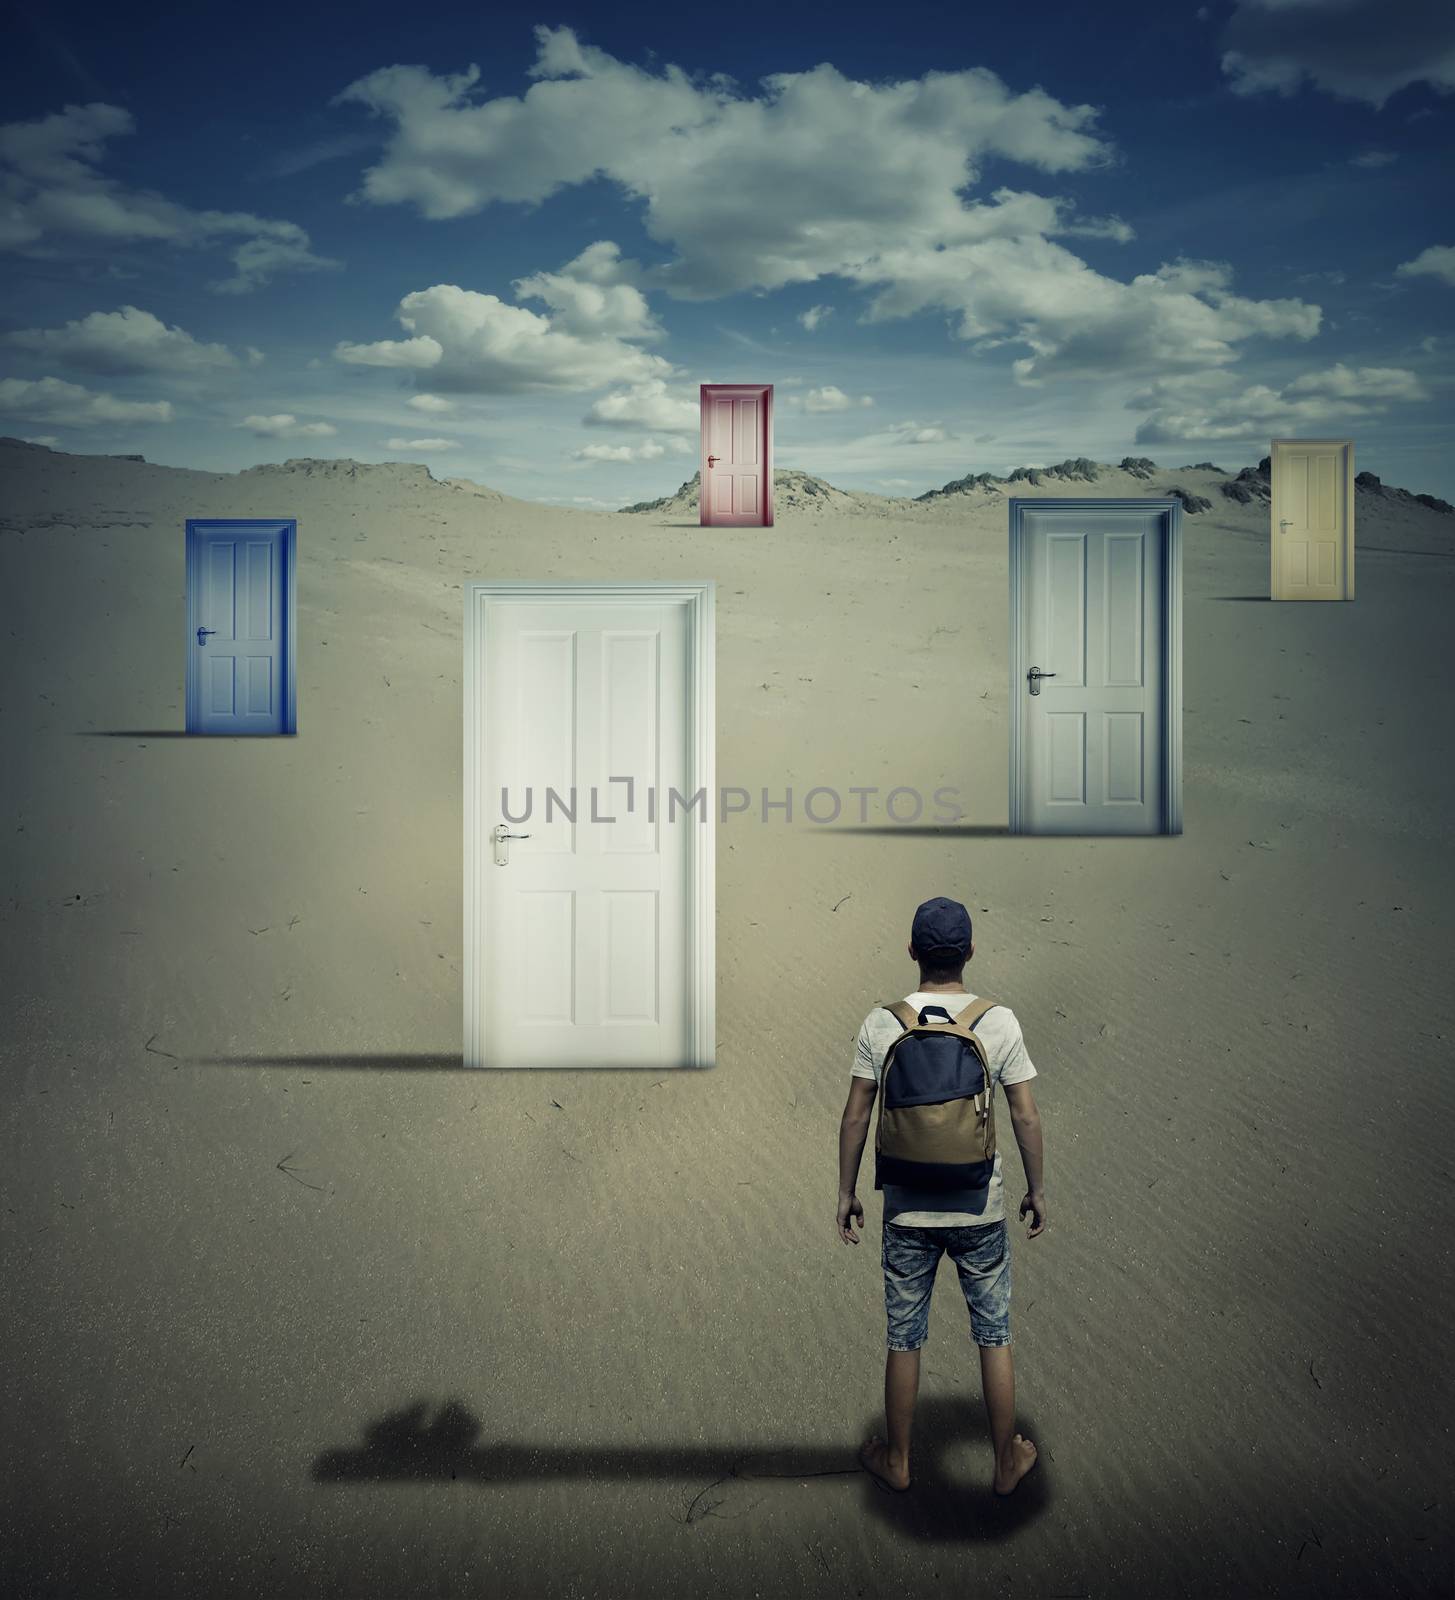 Conceptual image with a person standing in front of different closed doors, dropping a key shadow, choosing which one to open.